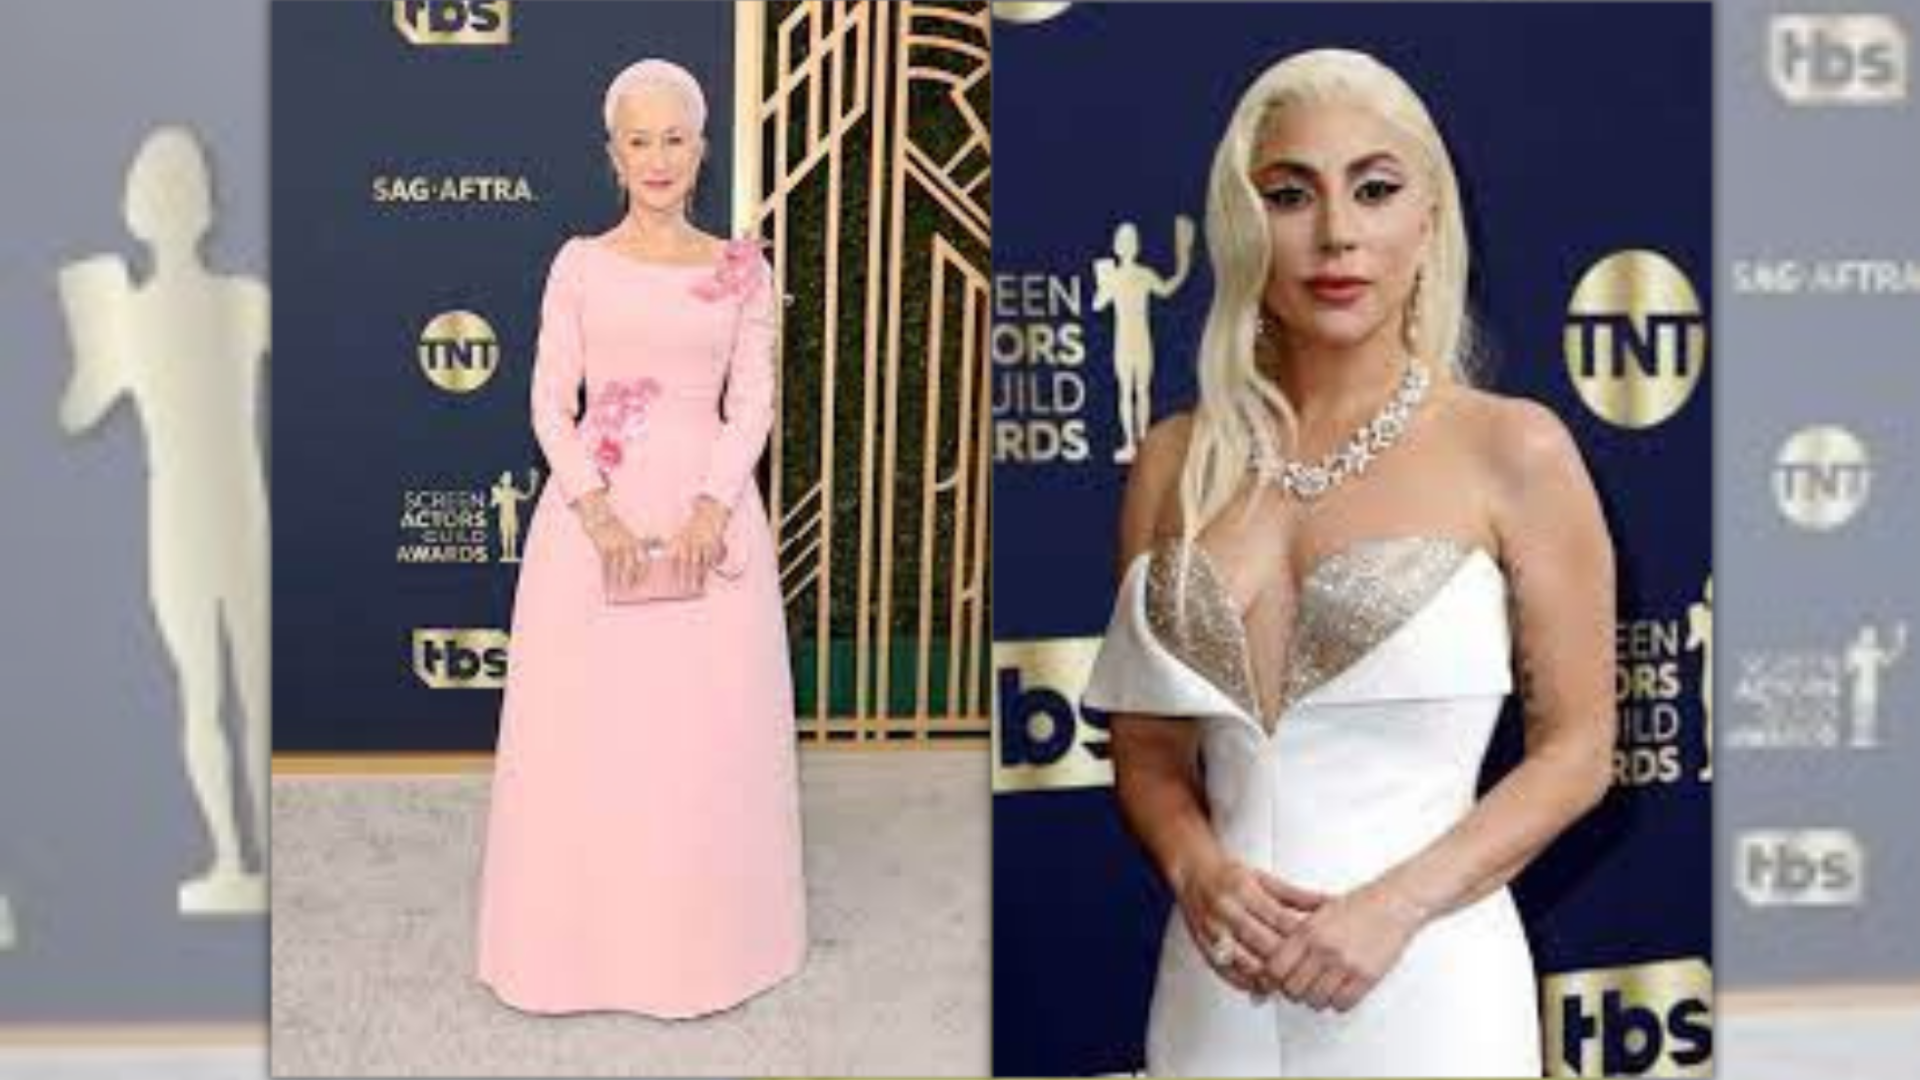 Lady Gaga Urges Mental Health Awareness With Grammys Win